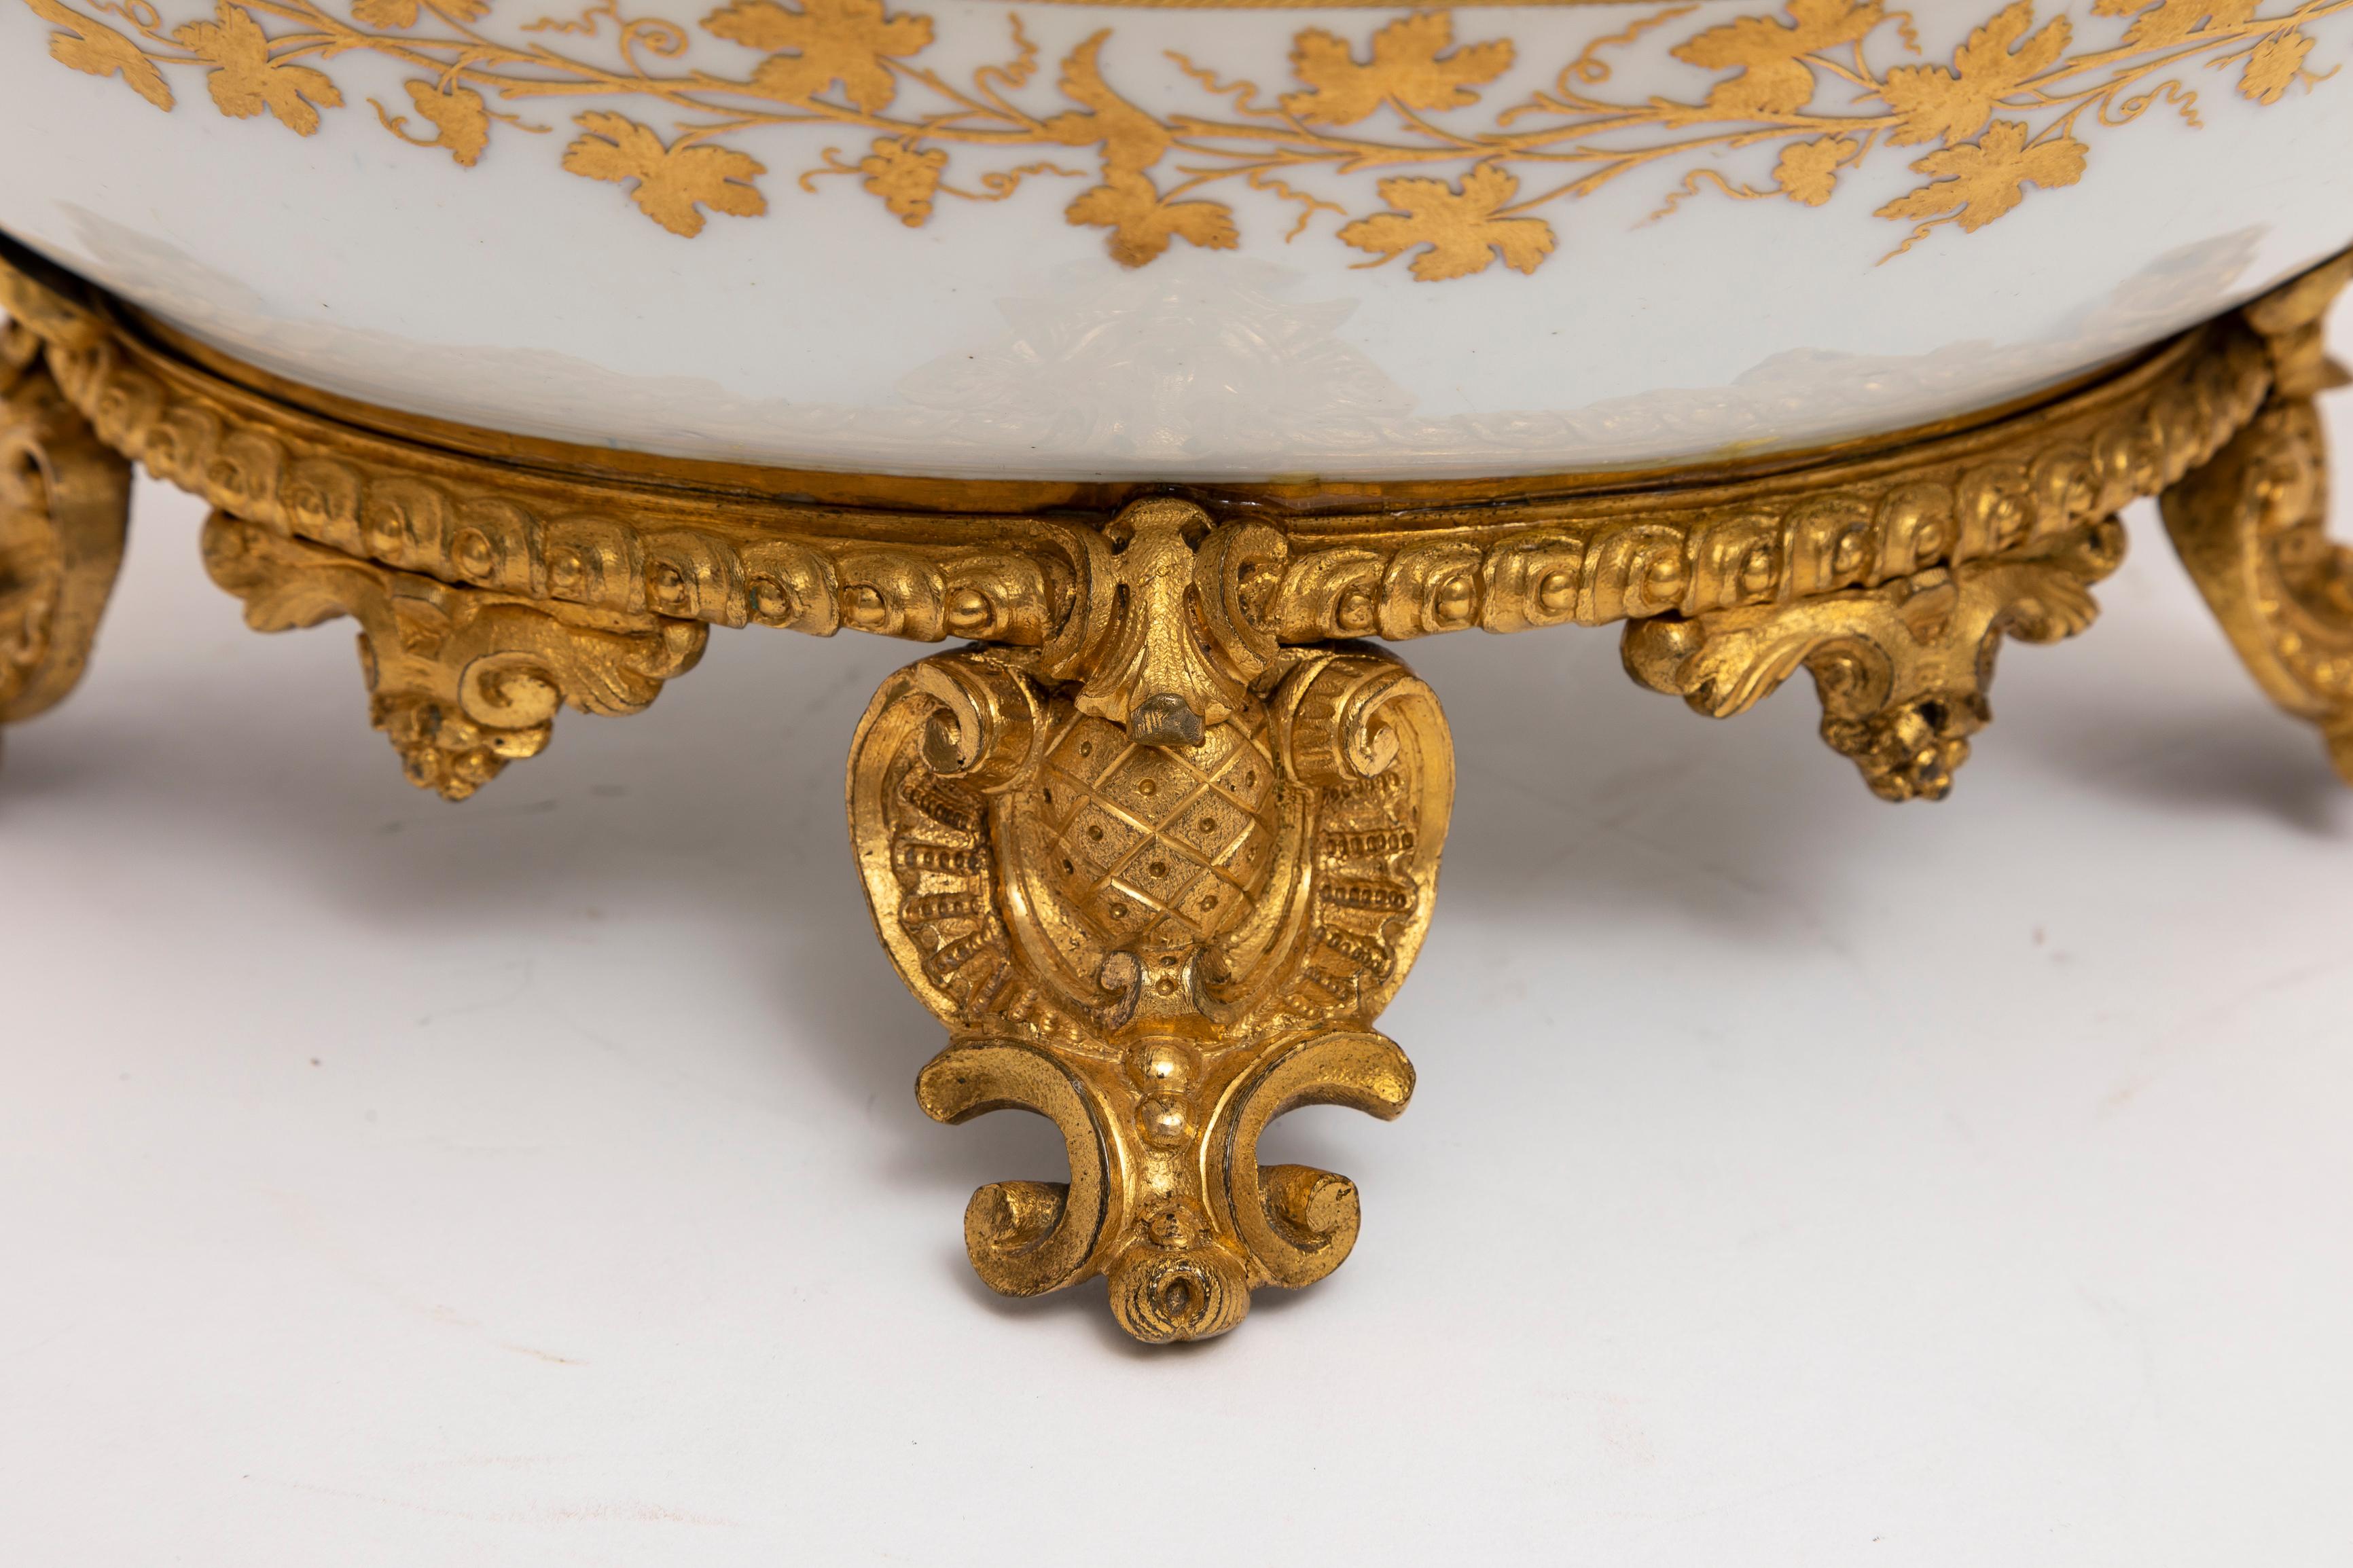 Bronze An 18th C. French Ormolu Mounted Sevres Porcelain Centerpiece w/ Dragon Handles For Sale